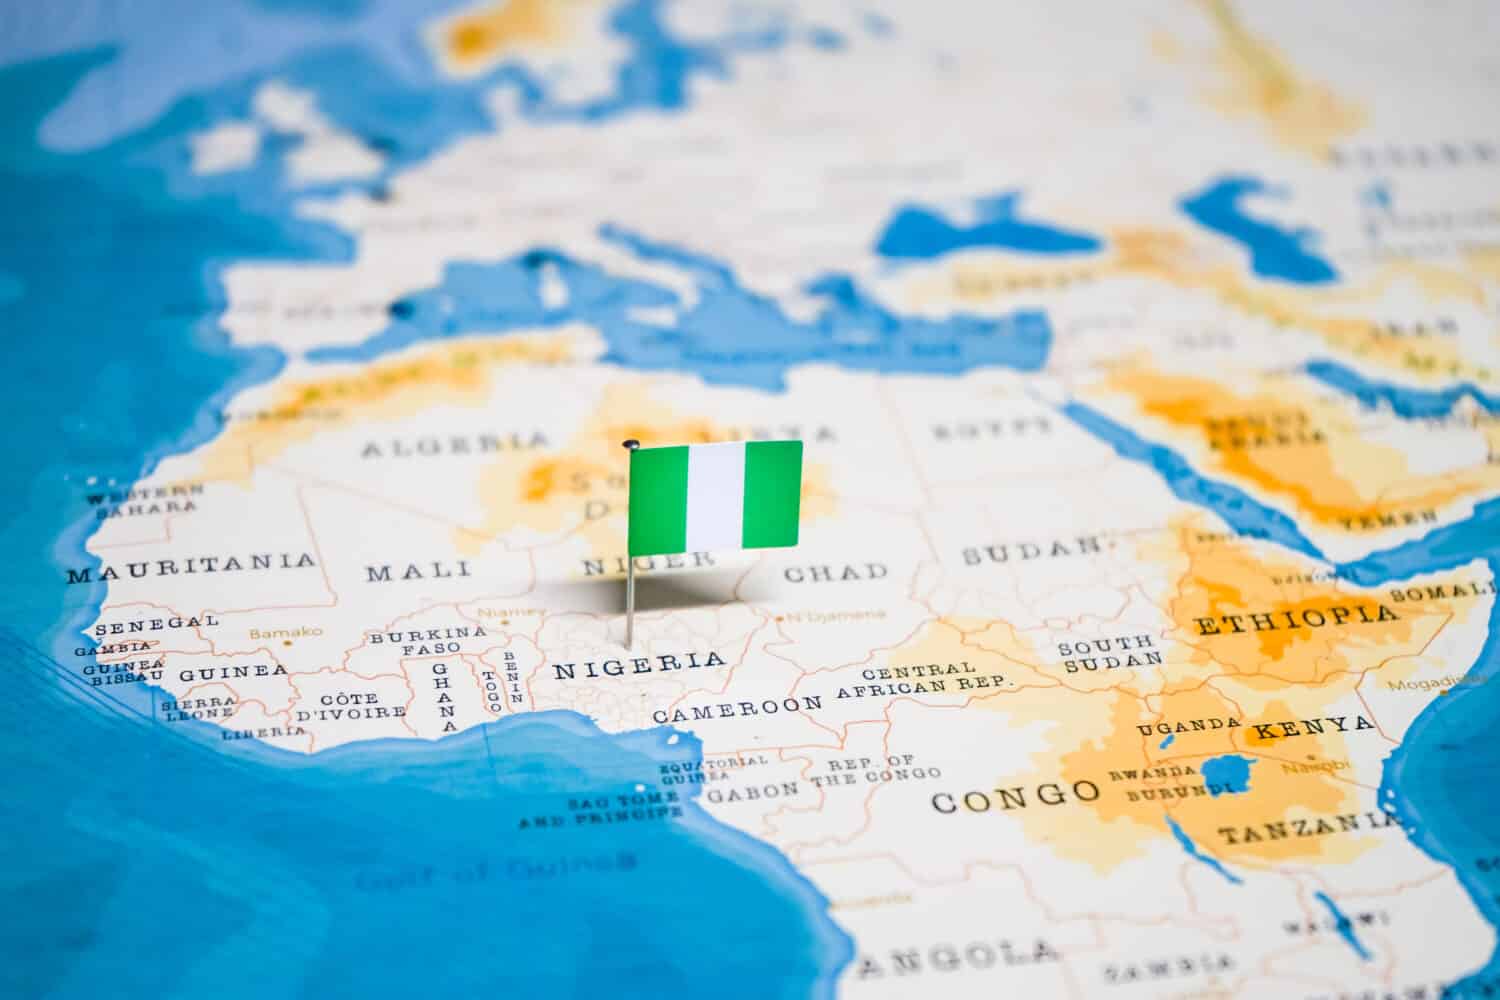 the Flag of nigeria in the world map